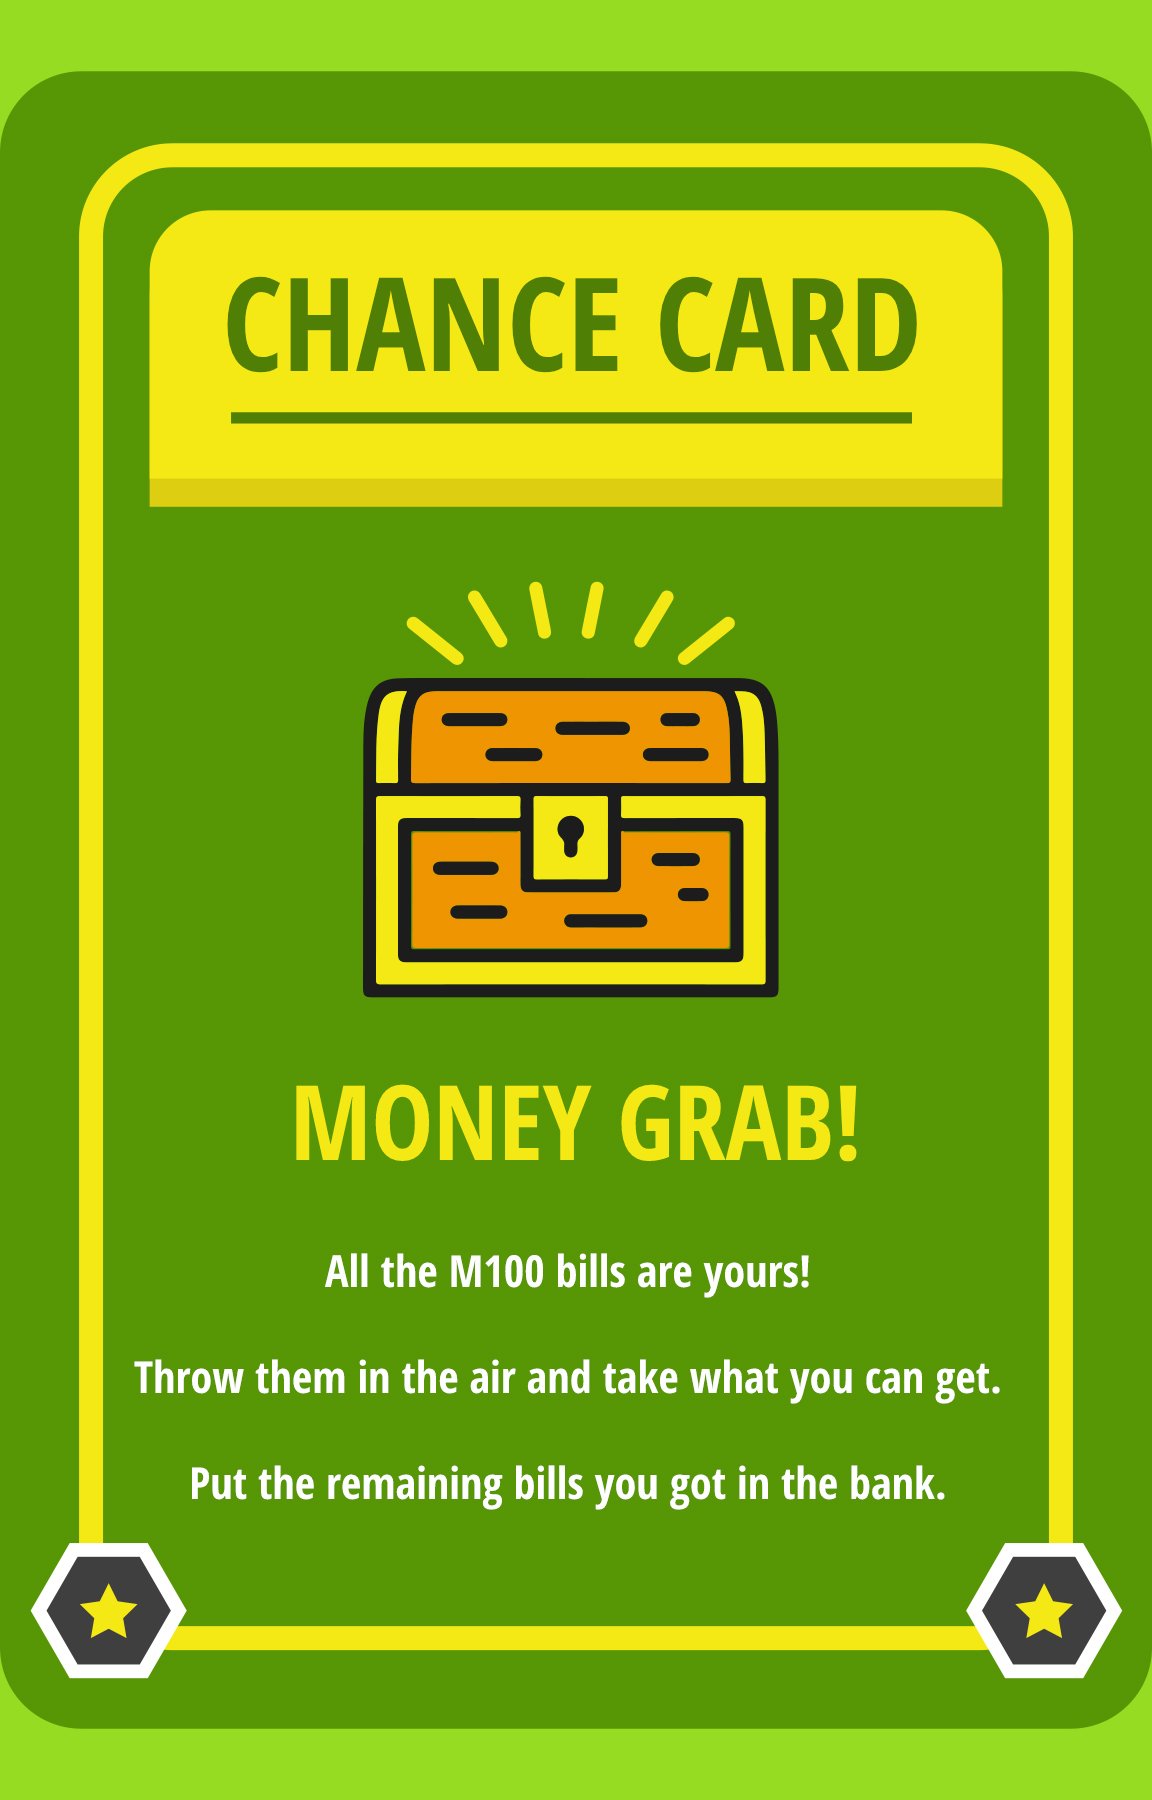 Free Monopoly Chance Card Template Download in PDF, Illustrator, PSD